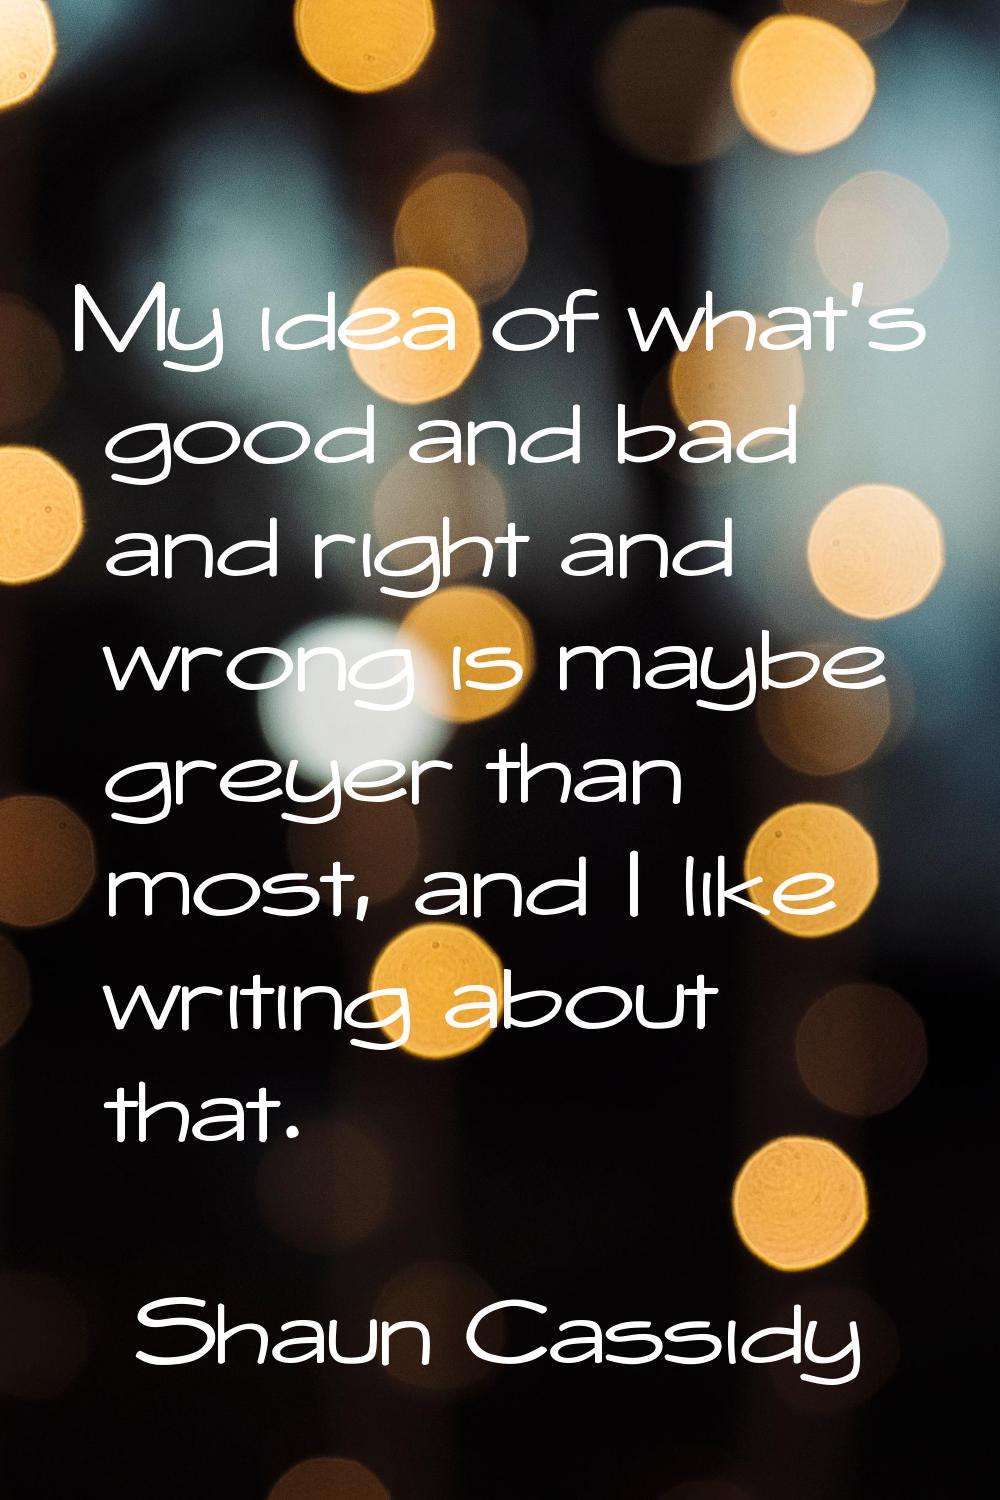 My idea of what's good and bad and right and wrong is maybe greyer than most, and I like writing ab